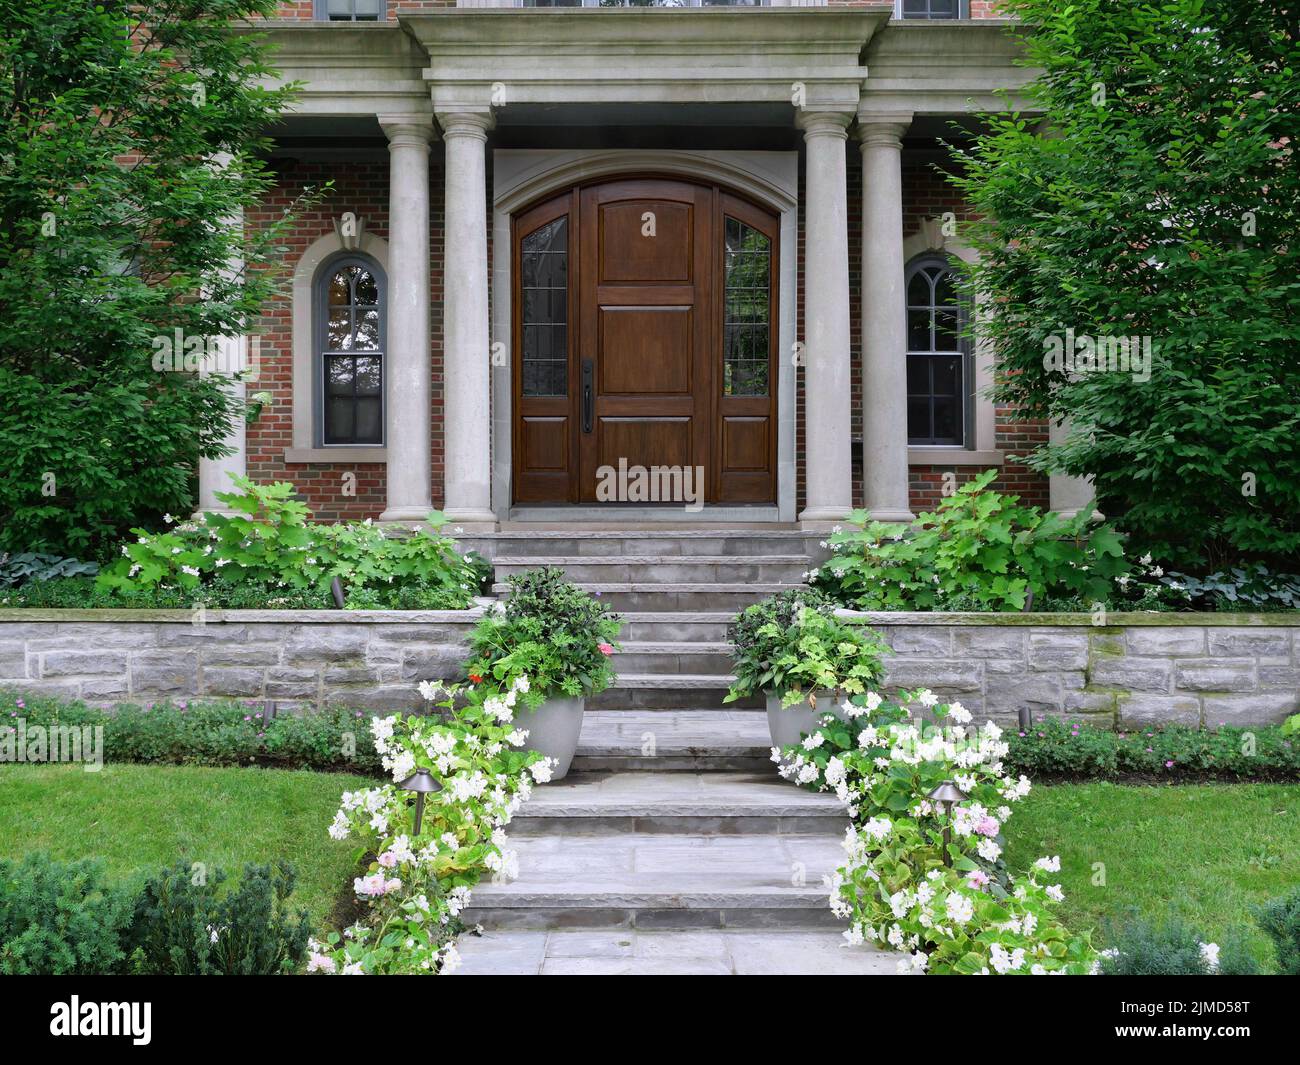 Elegant wood grain front door of house on porch with columns surrounded by shrubbery Stock Photo